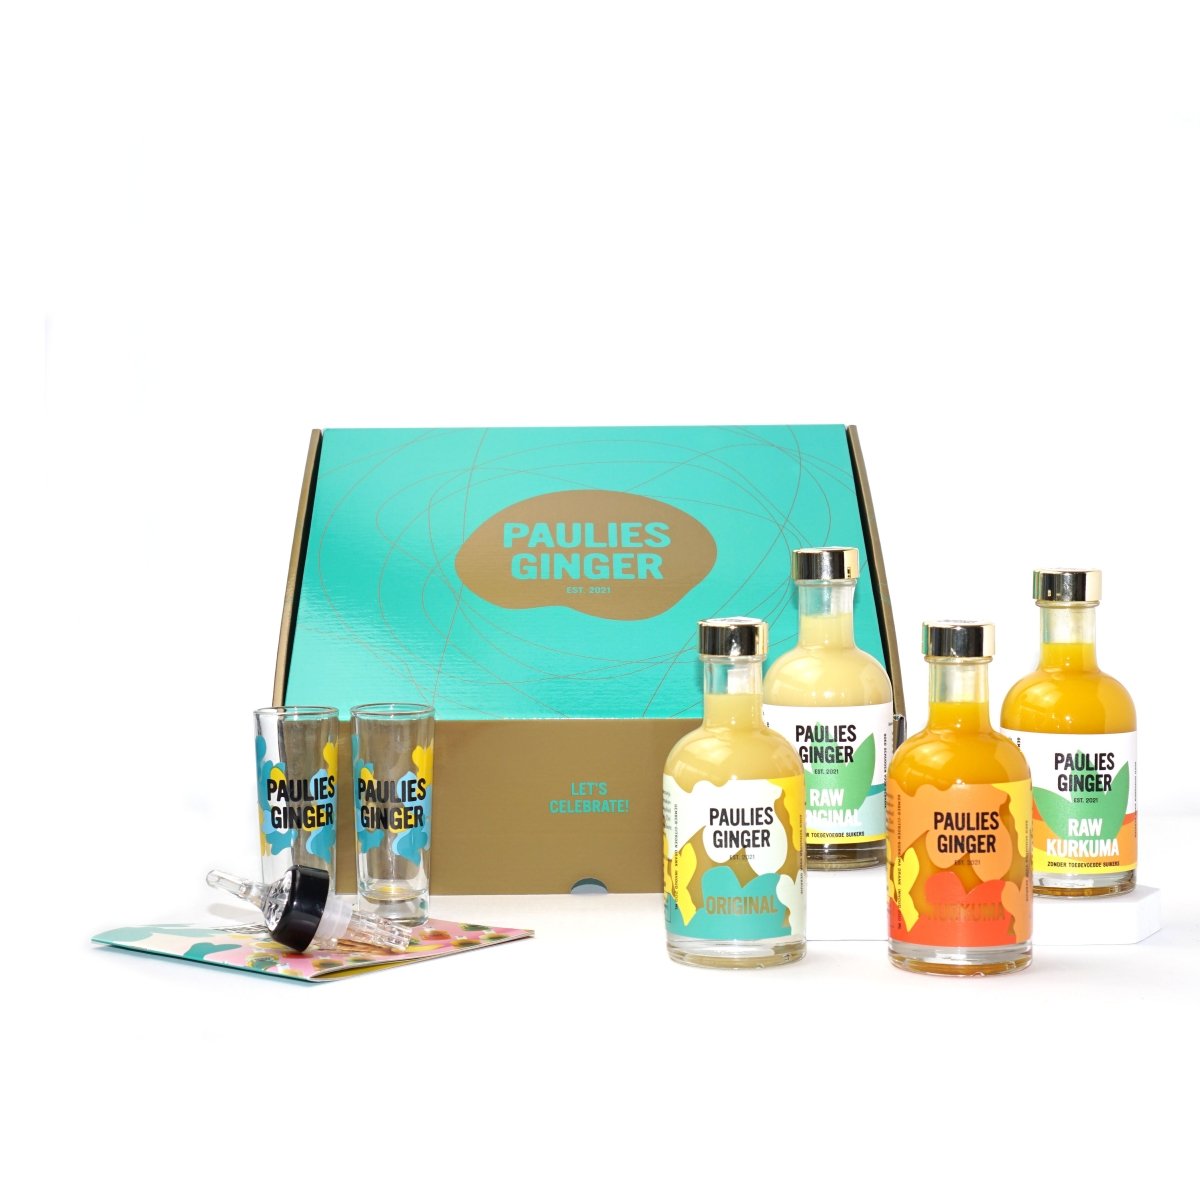  Giftbox de Alles Proever by Paulies Ginger sold by Paulies Ginger 